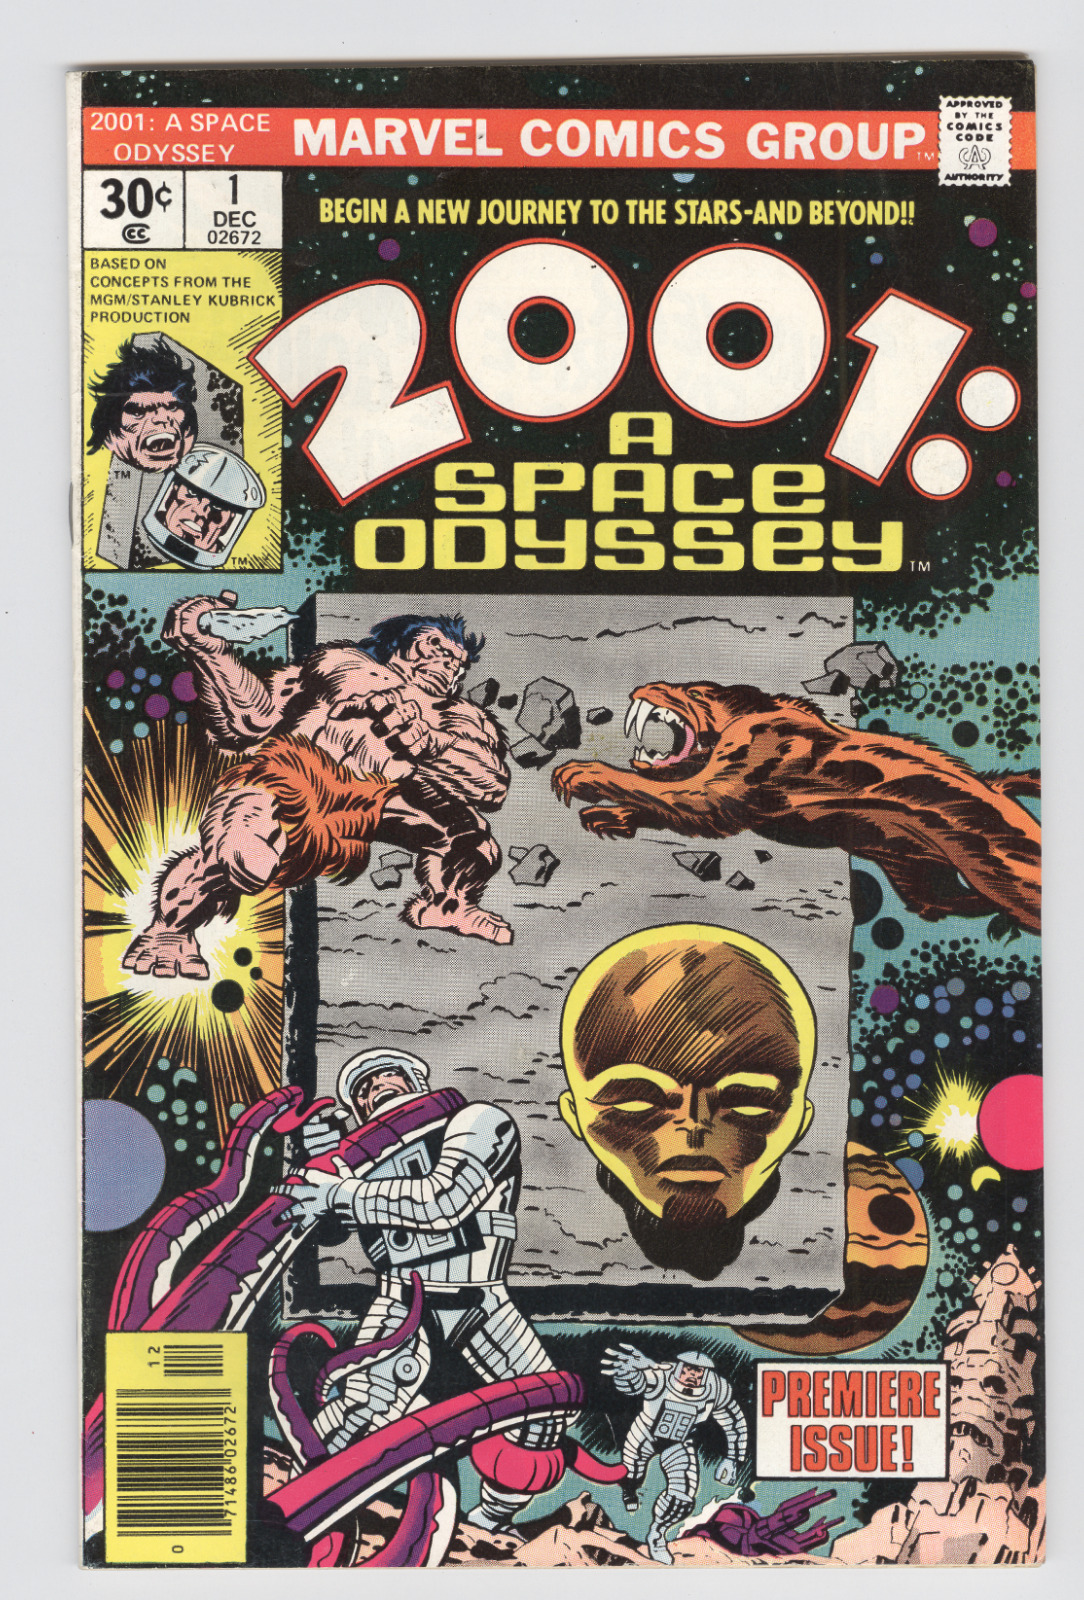 2001: A Space Odyssey #1 December 1976 FN+ Jack Kirby